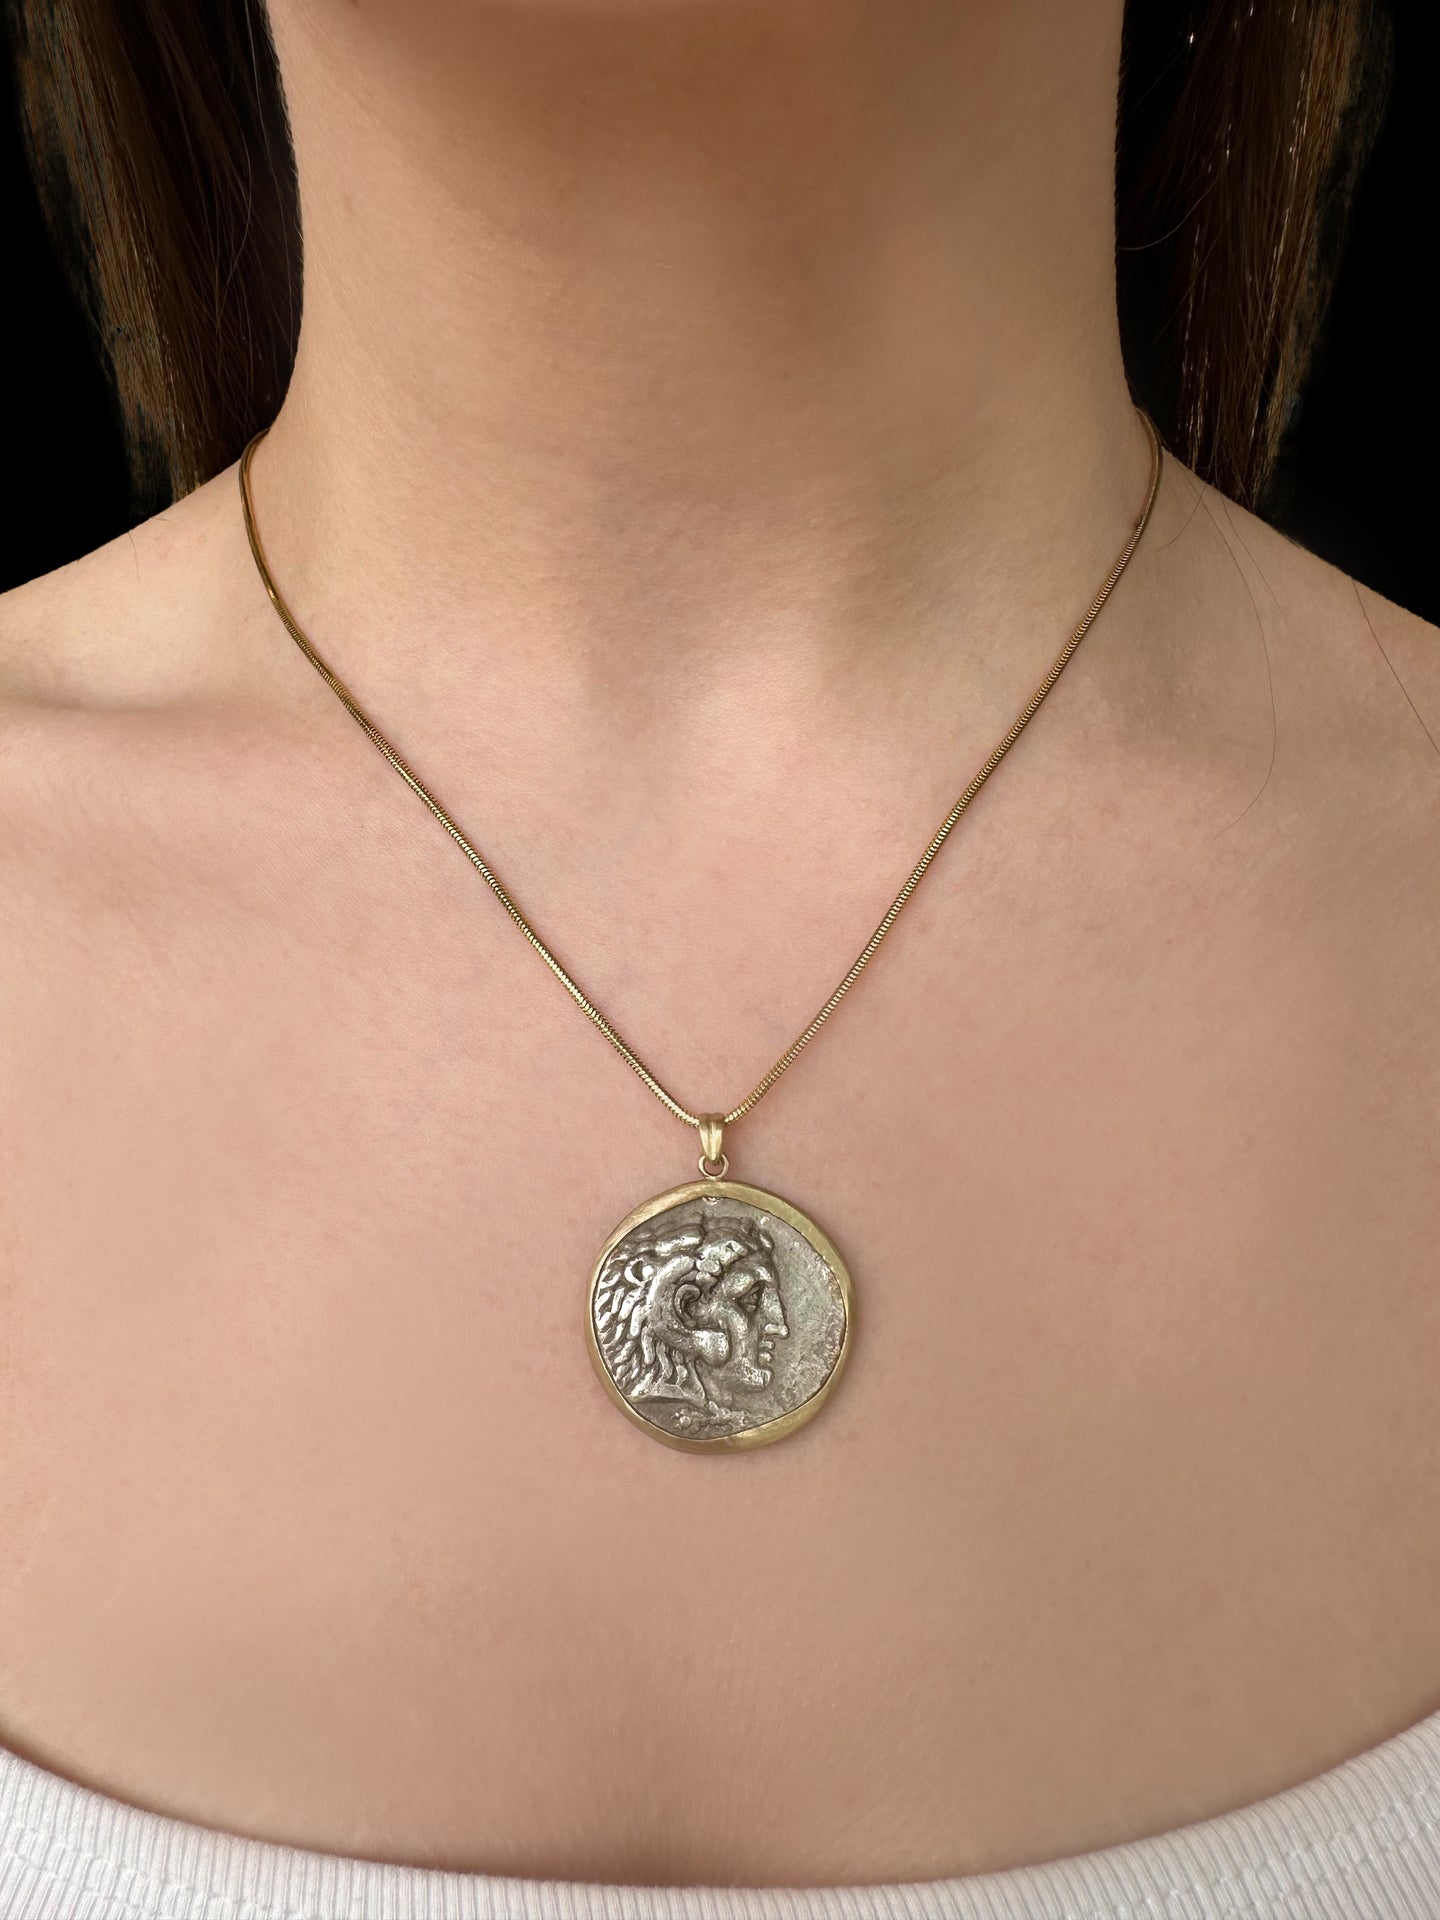 Ancient Alexander the Great Tetradrachm Coin Set in 14K Gold Pendant